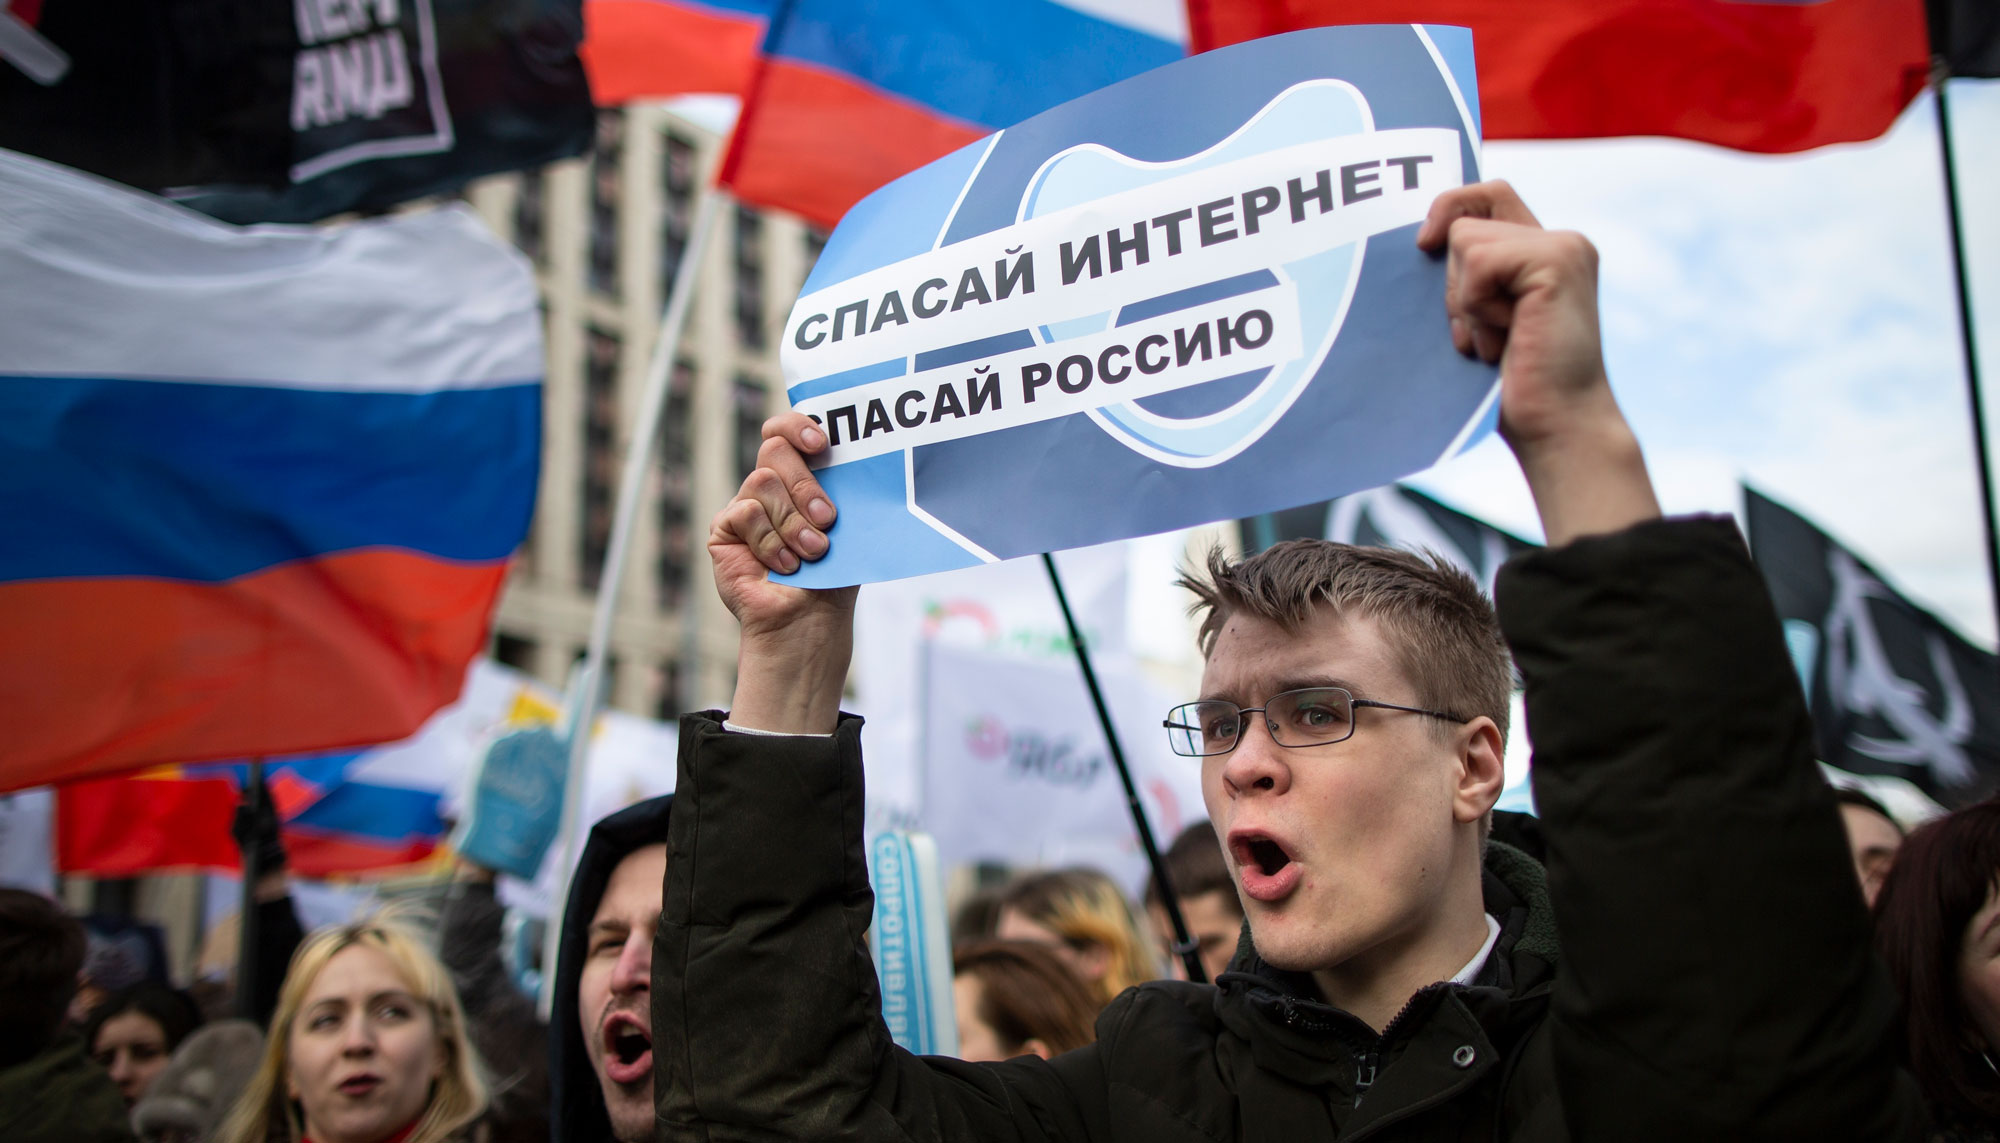 A protest against Russian internet censorship in March 2019